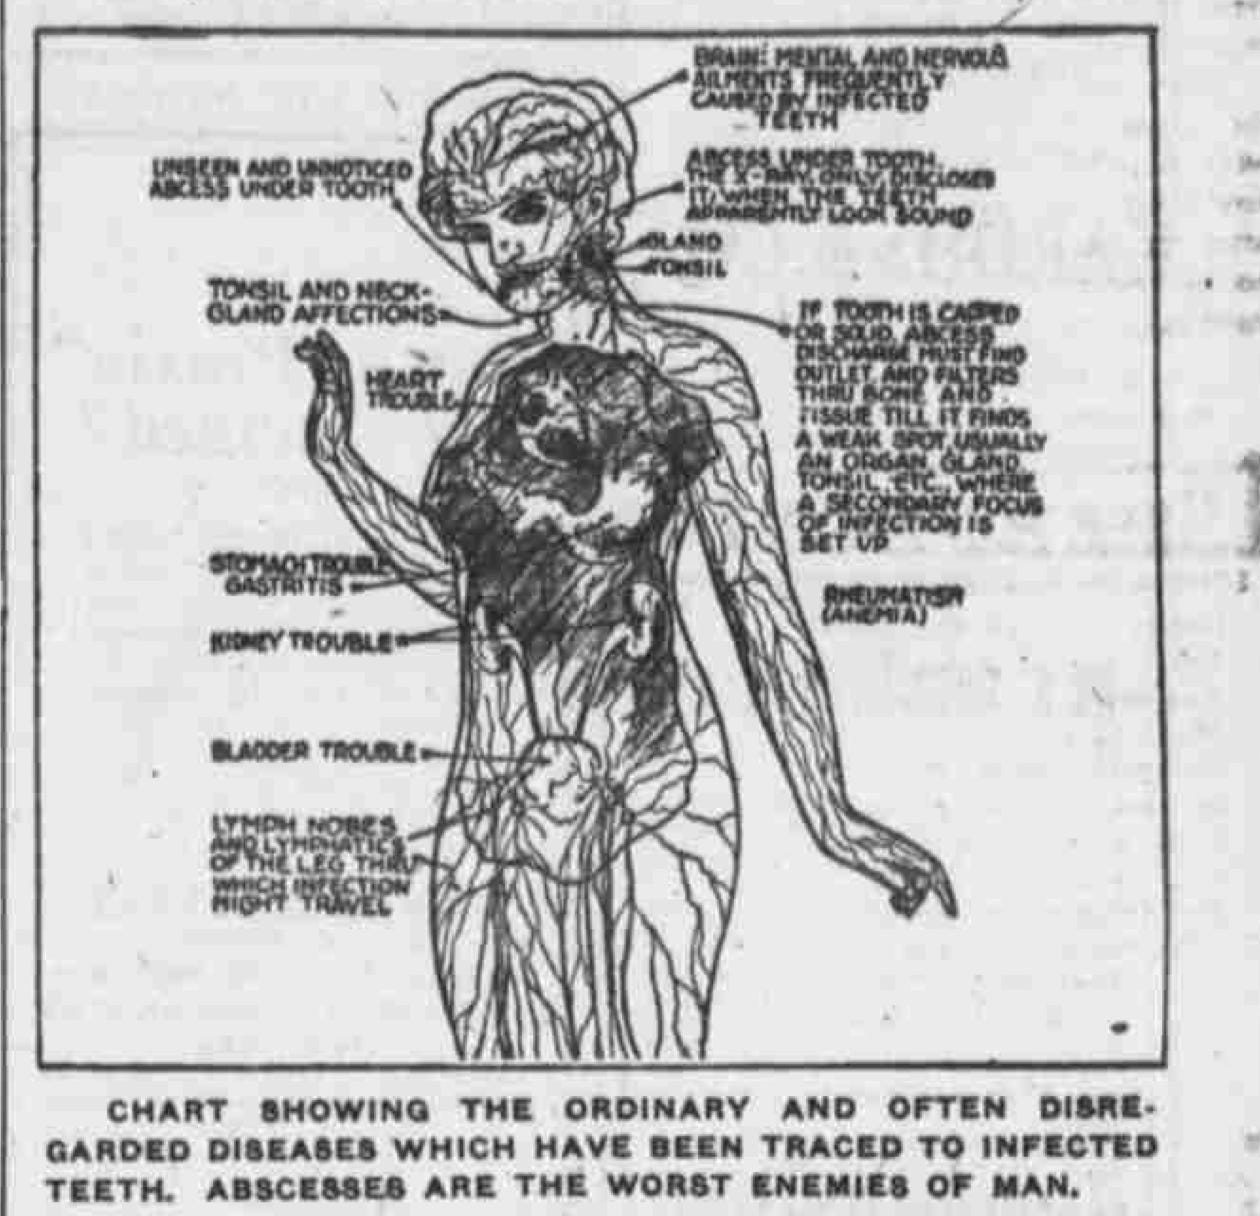 Newspaper graphic shows a woman's nervous system with the various diseases caused by tooth infections. It includes "mental and nervous disorders."